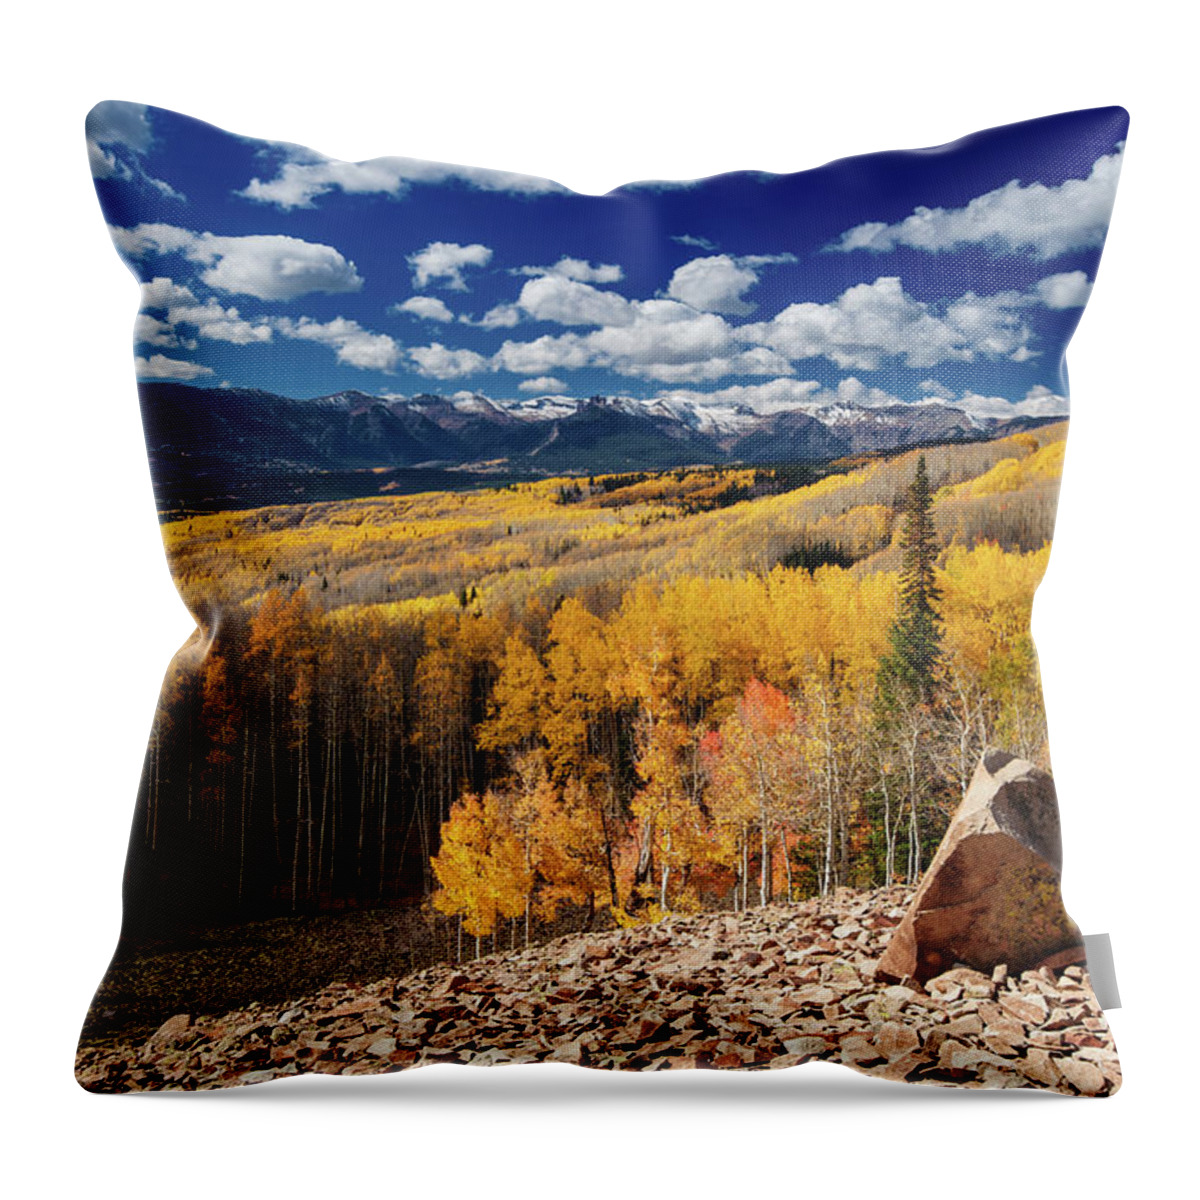 Scenics Throw Pillow featuring the photograph Aspen Forest by Piriya Photography